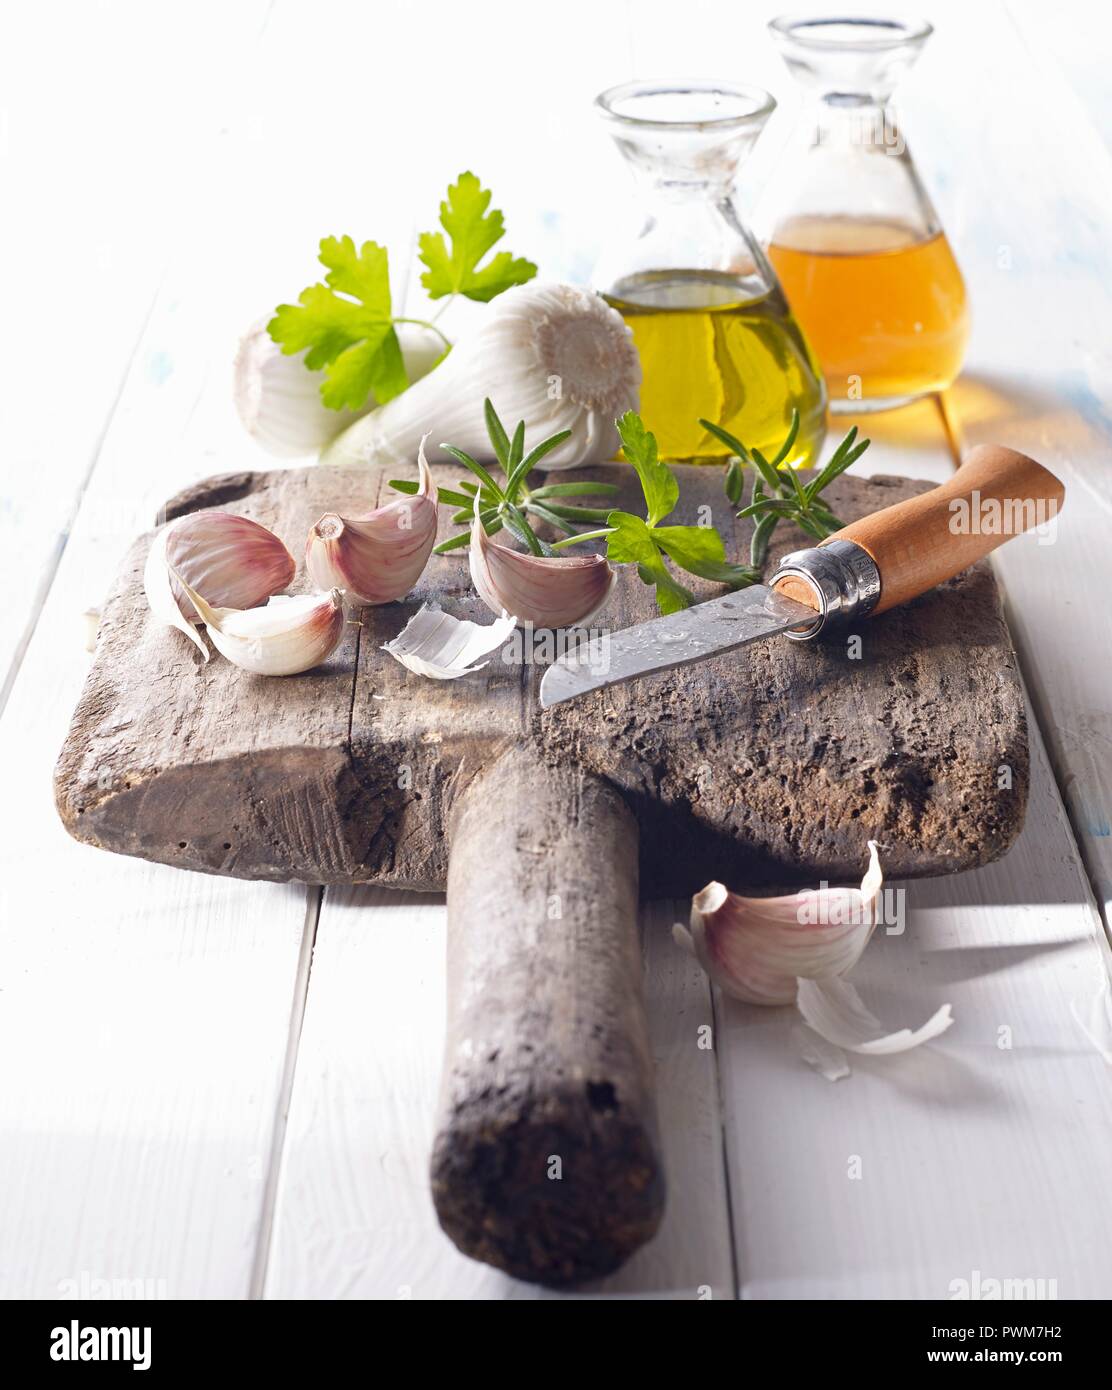 Cloves of garlic with oil, vinegar and a knife on an old wooden board Stock Photo